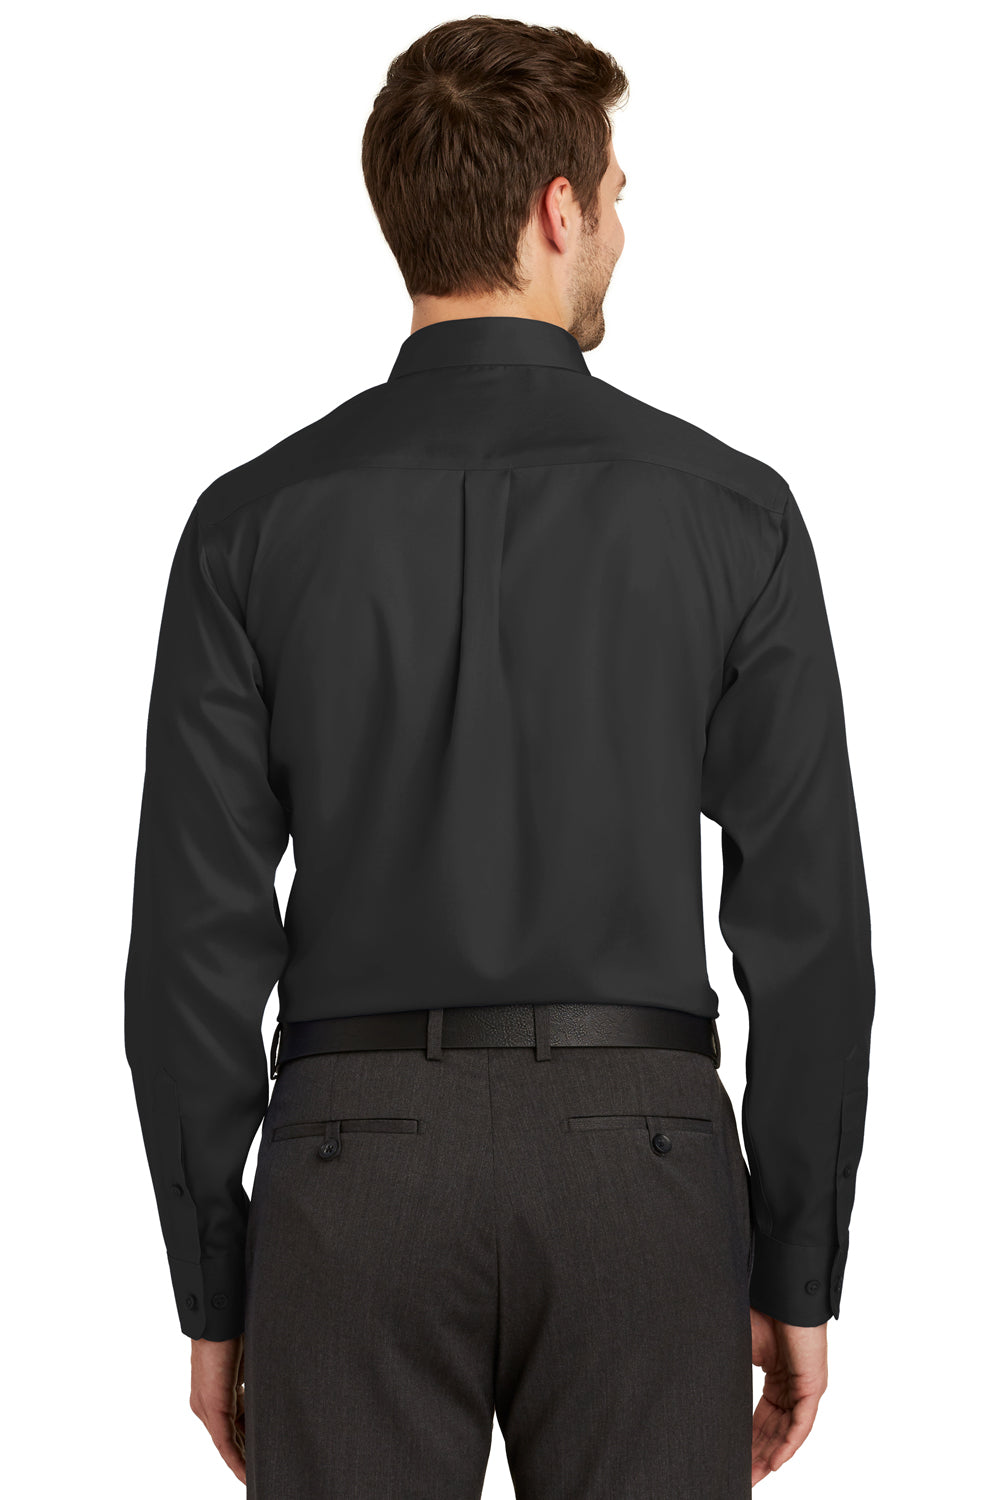 Port Authority S638 Mens Wrinkle Resistant Long Sleeve Button Down Shirt w/ Pocket Black Back